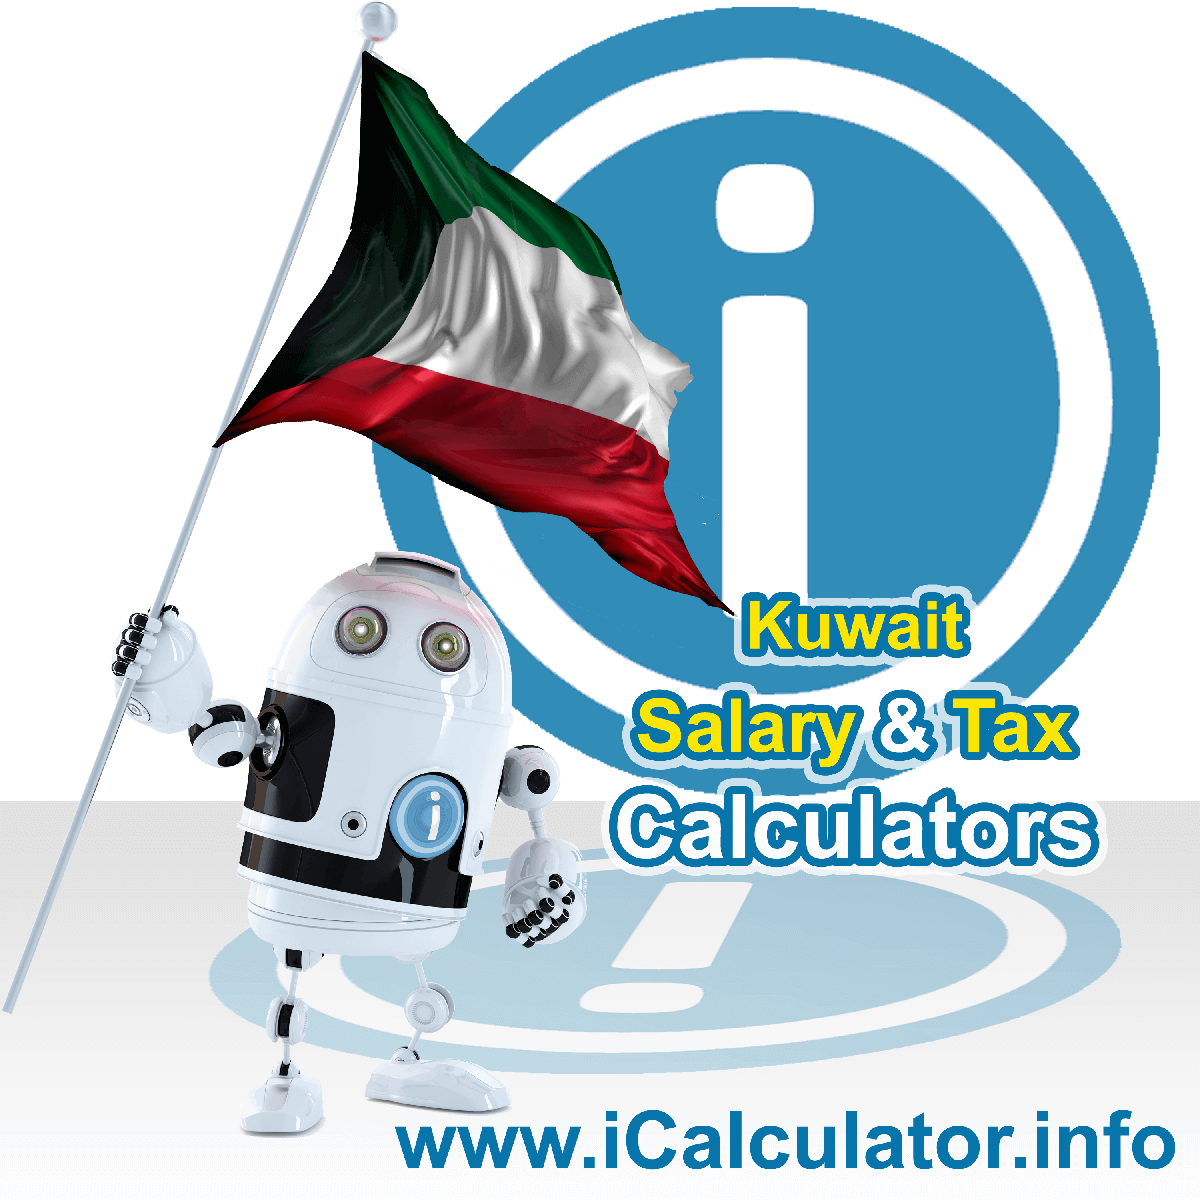 Kuwait Wage Calculator. This image shows the Kuwait flag and information relating to the tax formula for the Kuwait Tax Calculator